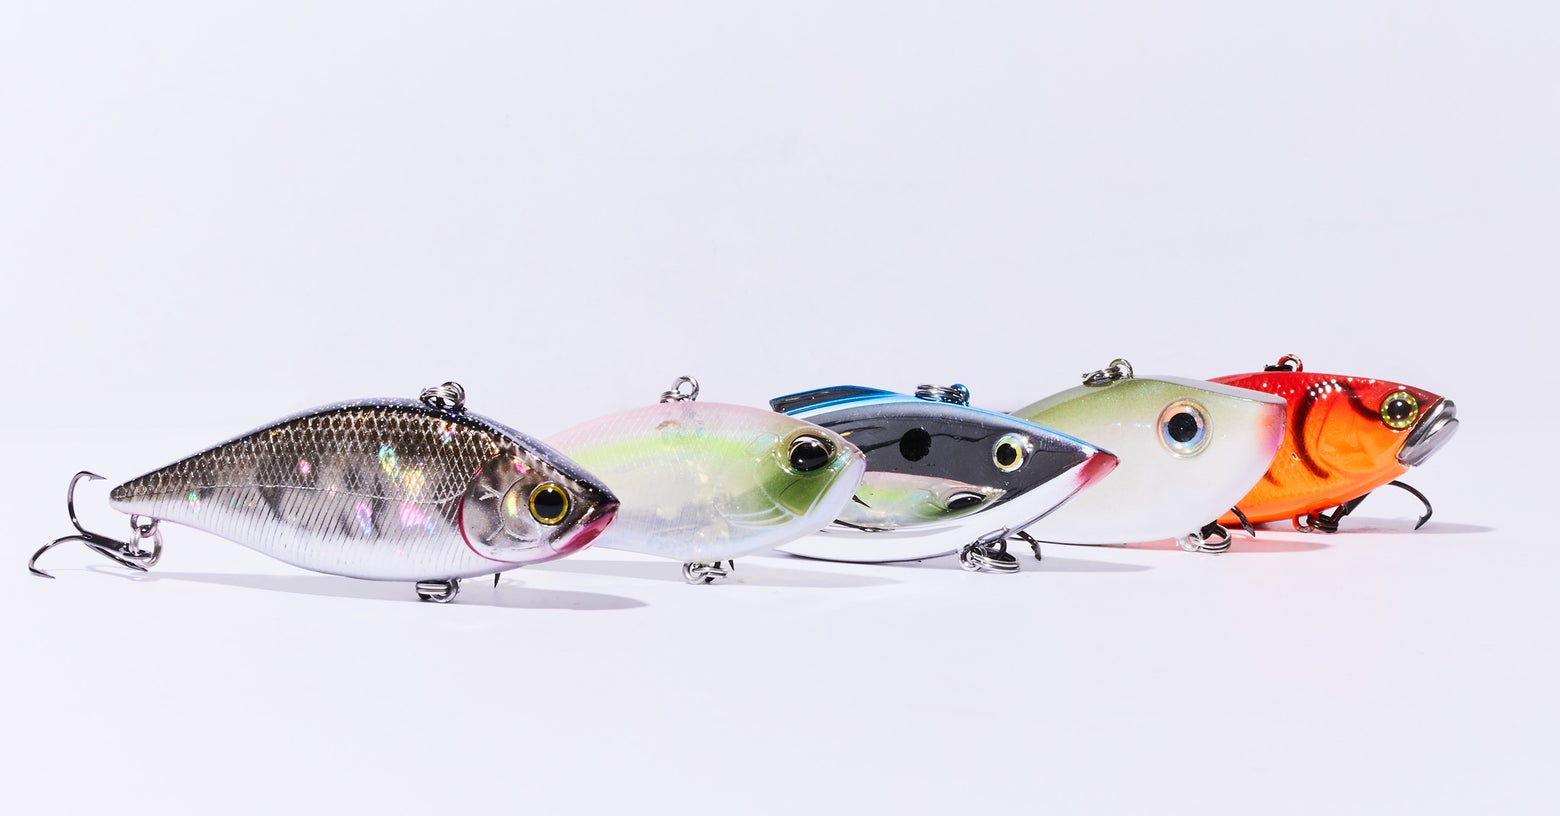 Australian bass fishing is all about casting the right lures in